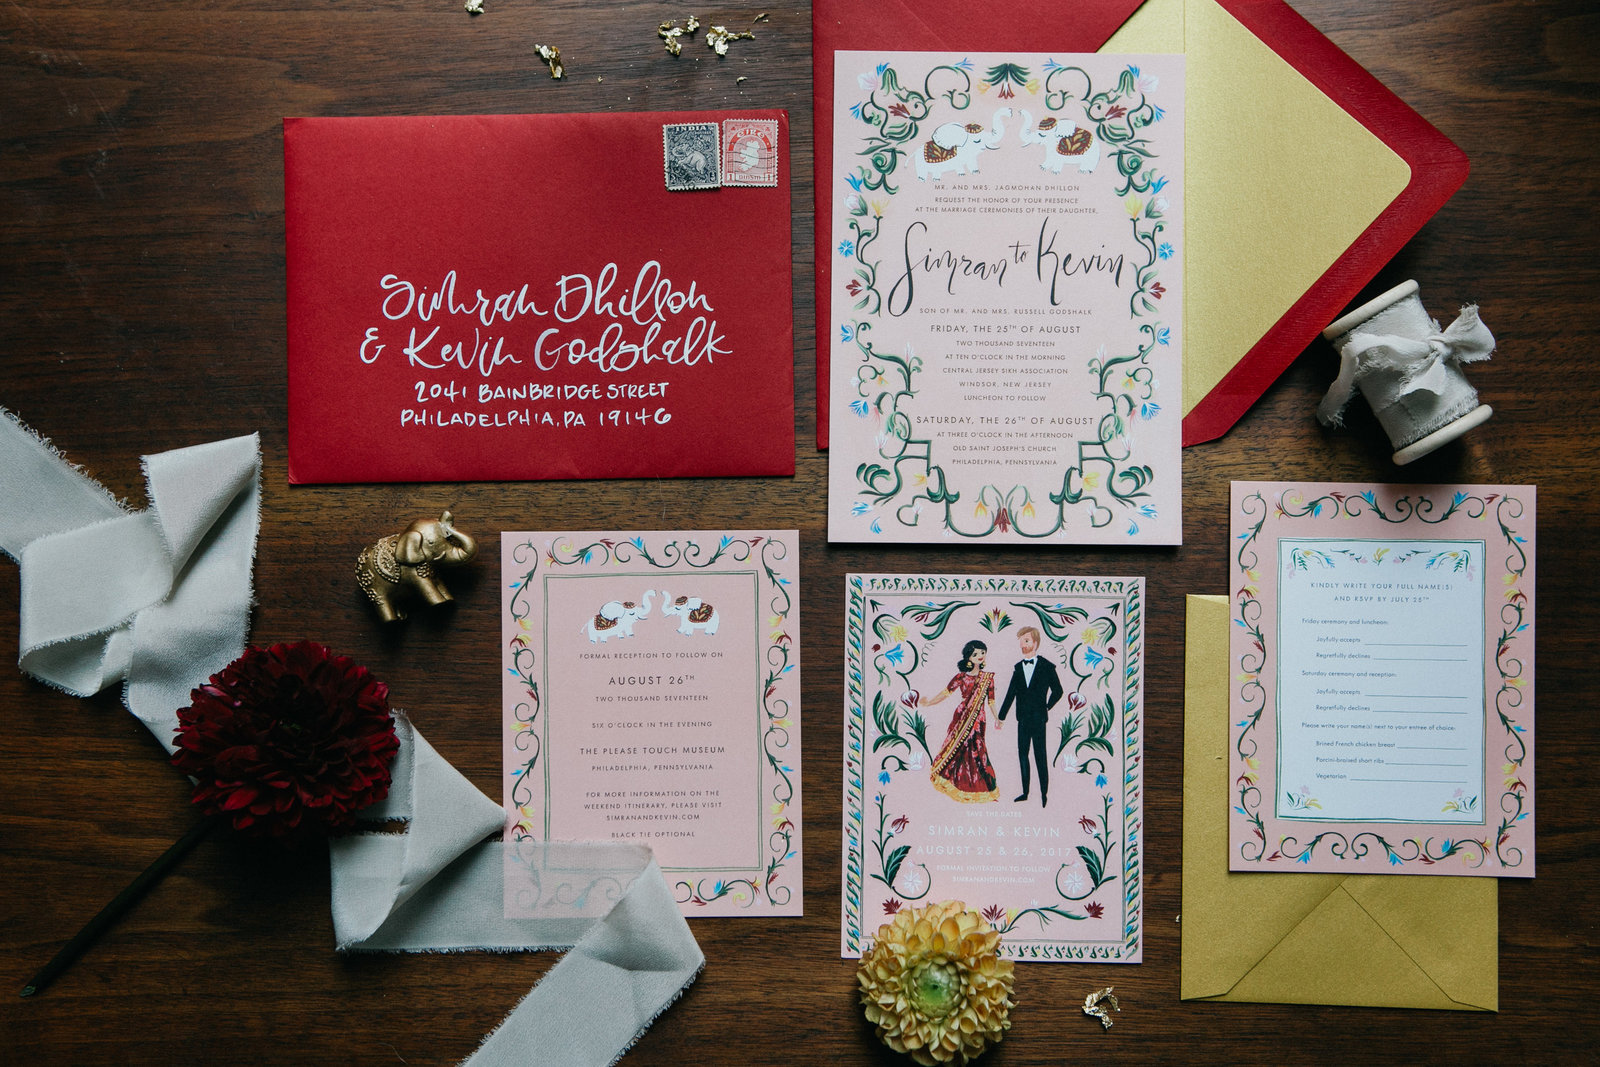 Colorful invitation suite for this Please Touch Museum wedding.